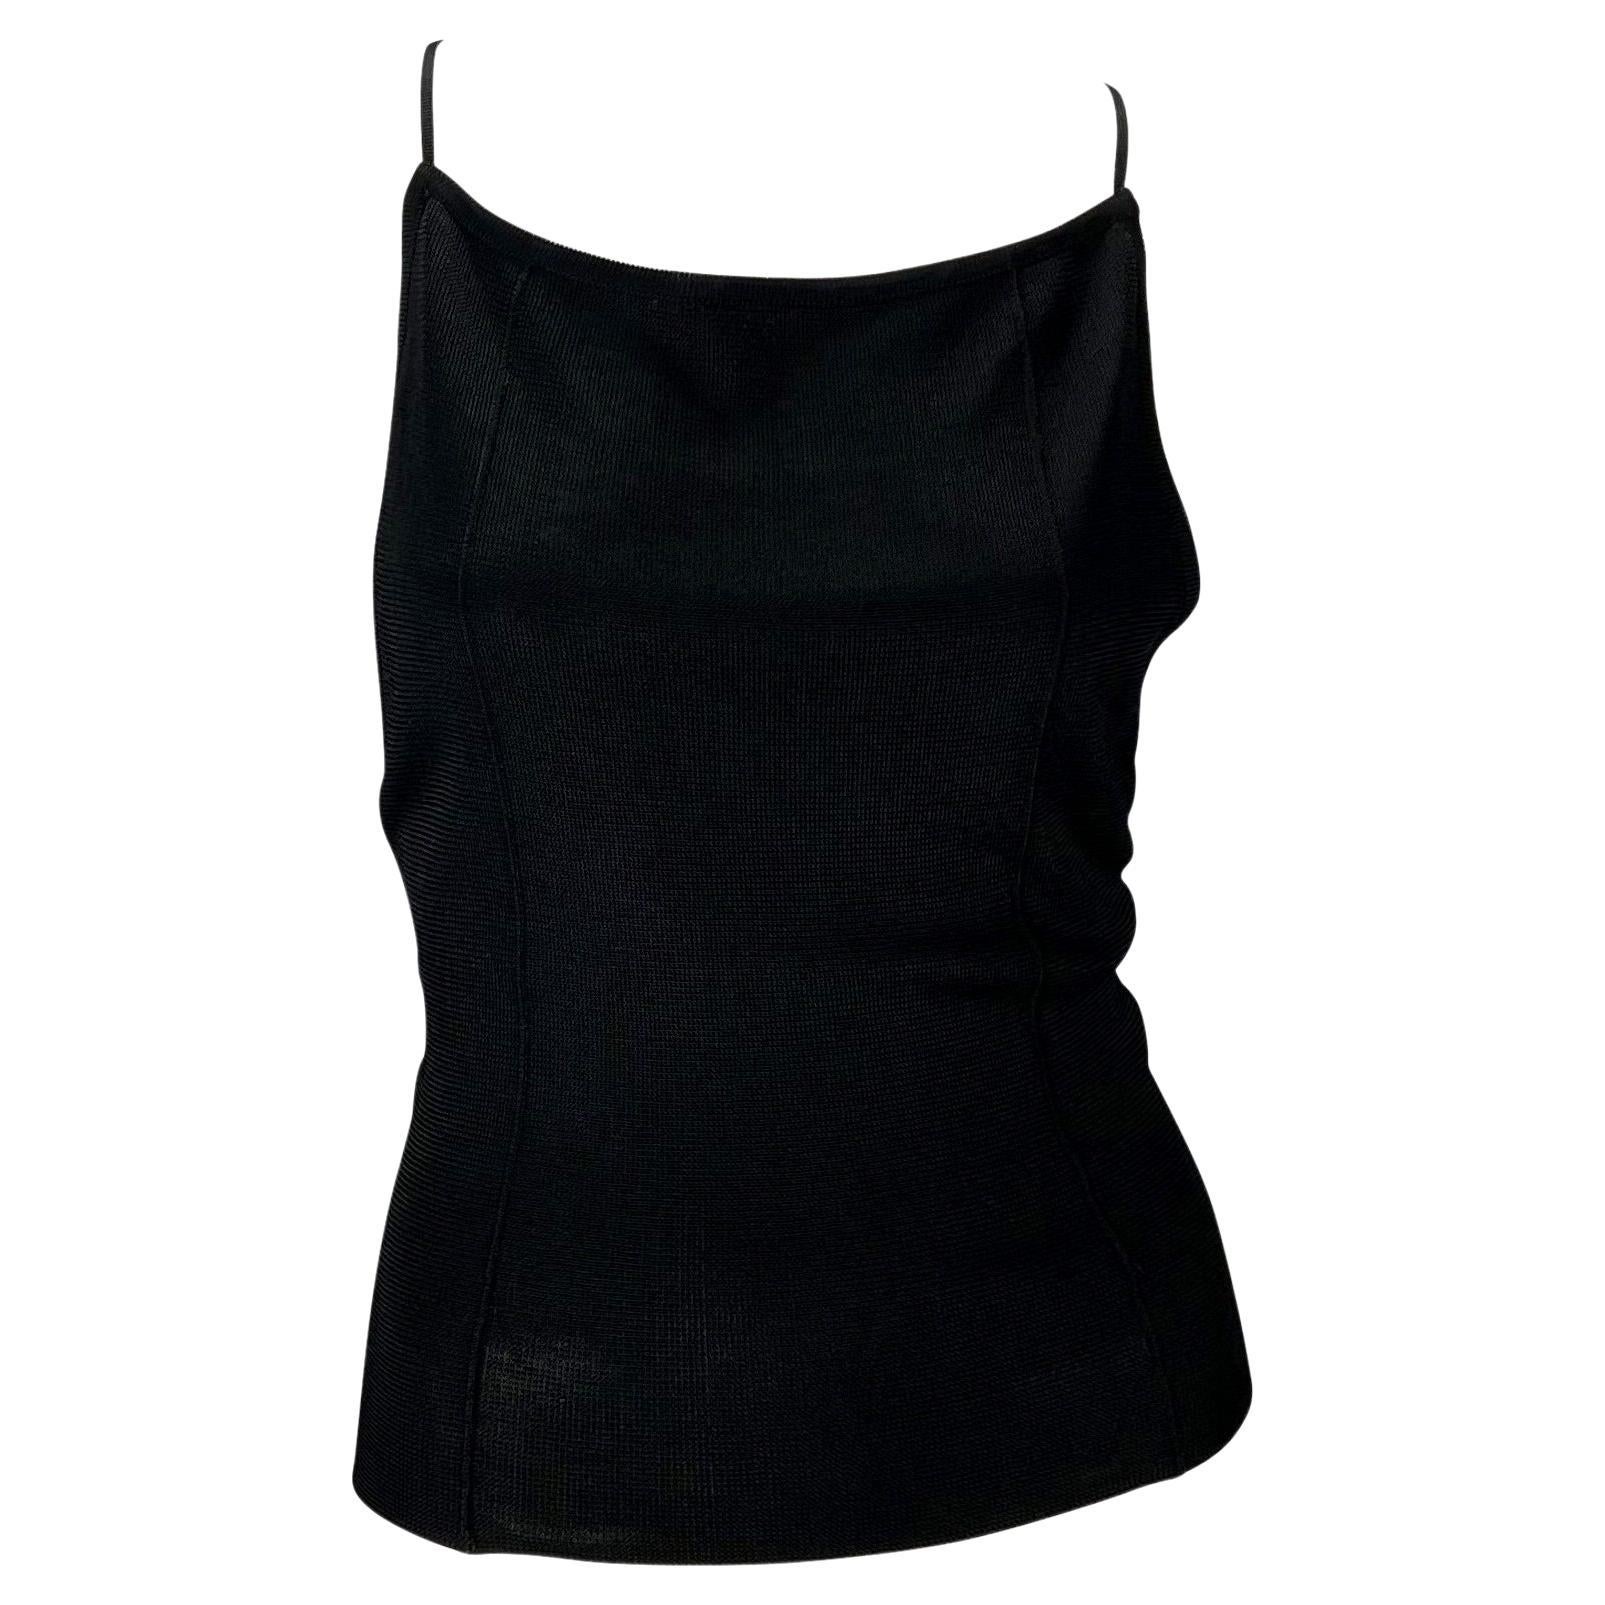 S/S 1997 Gucci by Tom Ford Backless Black Knit Viscose Semi-Sheer Stretch Top For Sale 1